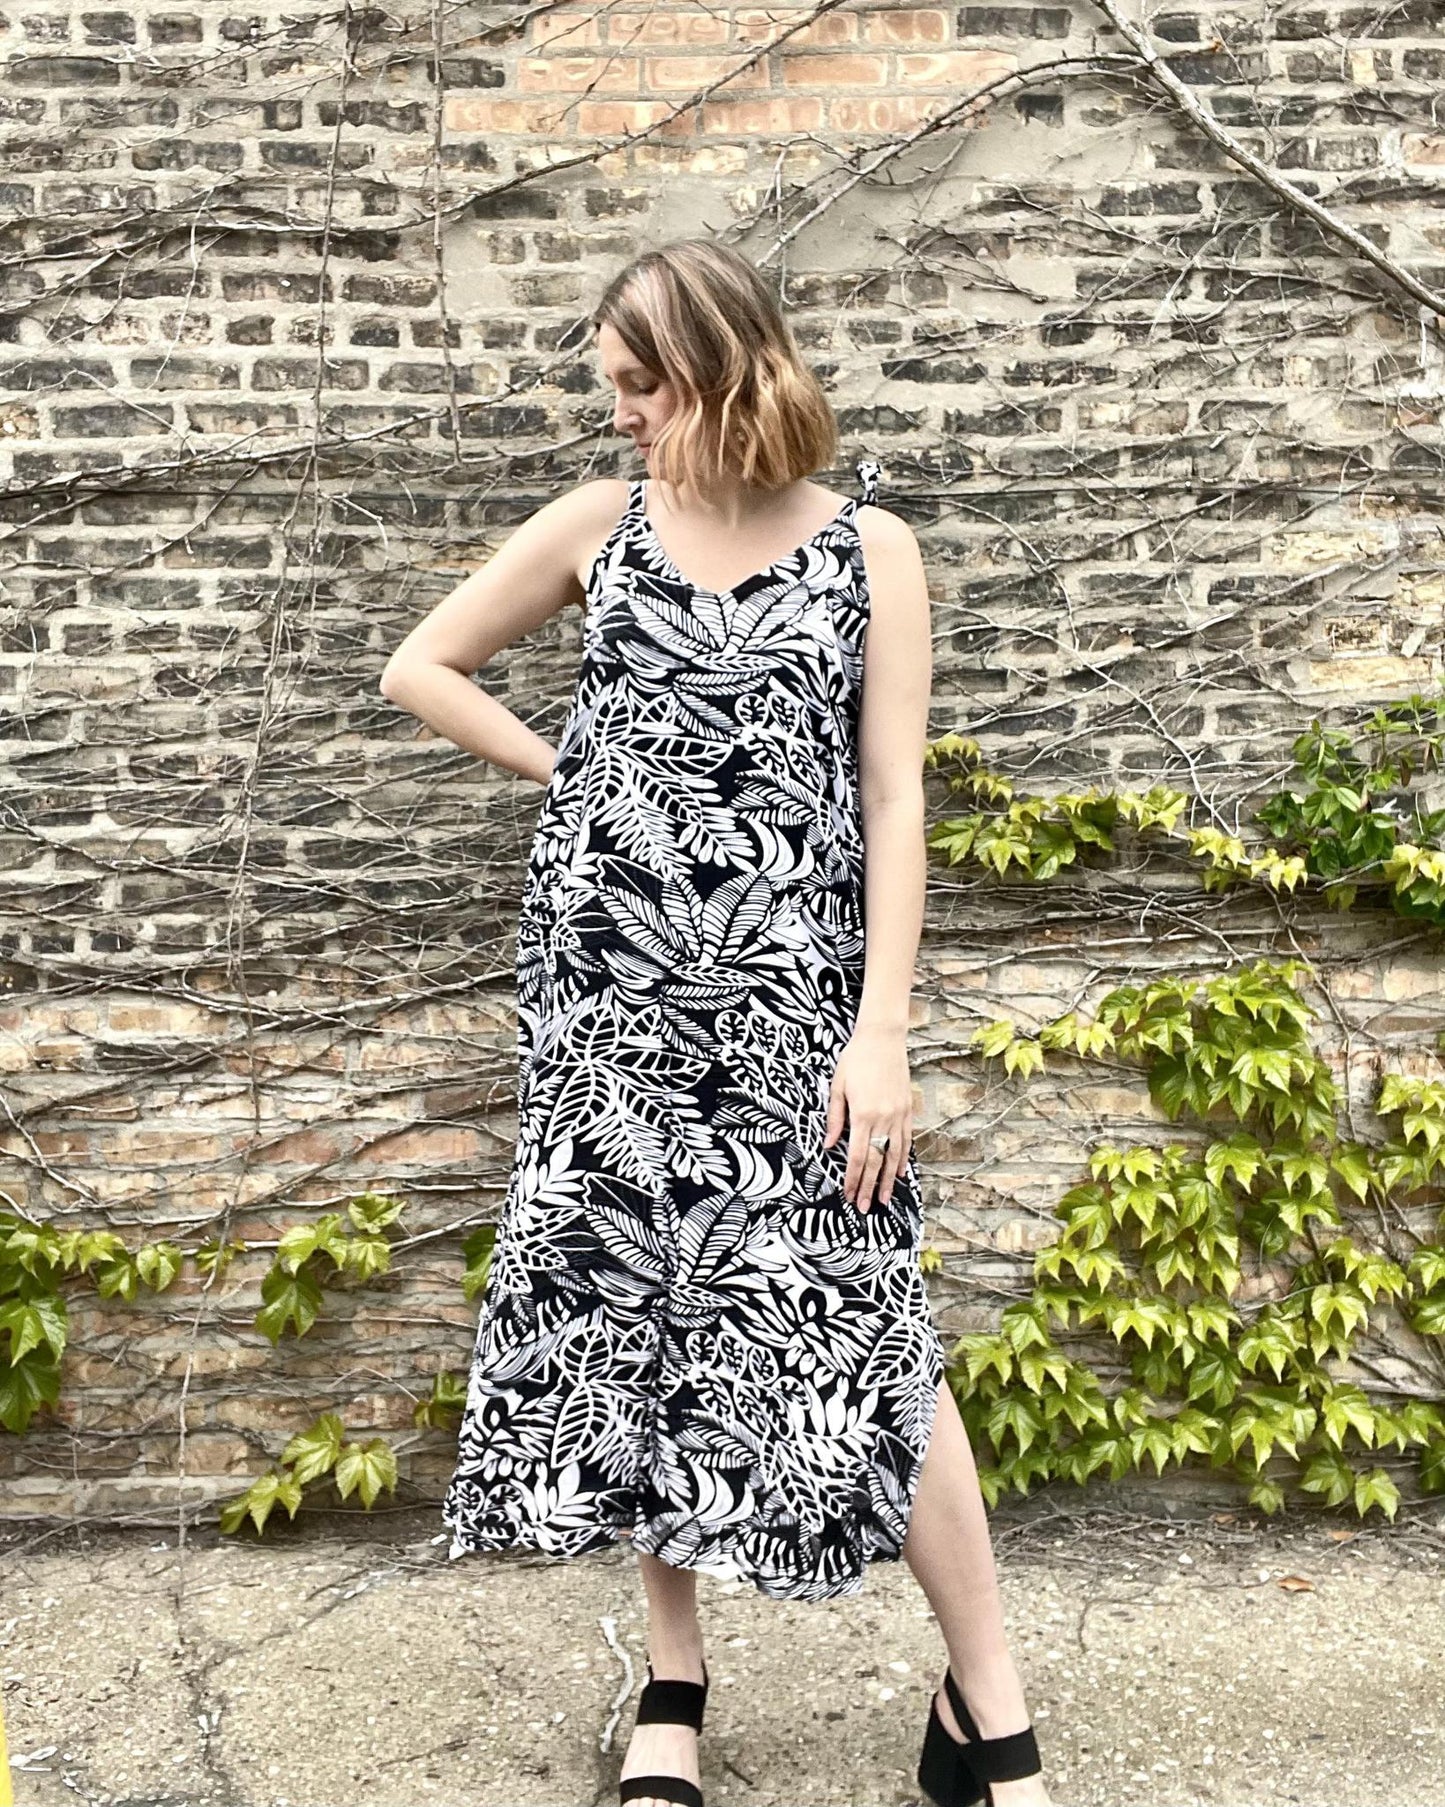 Tangerine Temple Shoulder Tie Dress in Black and White Tropical Print - SALE